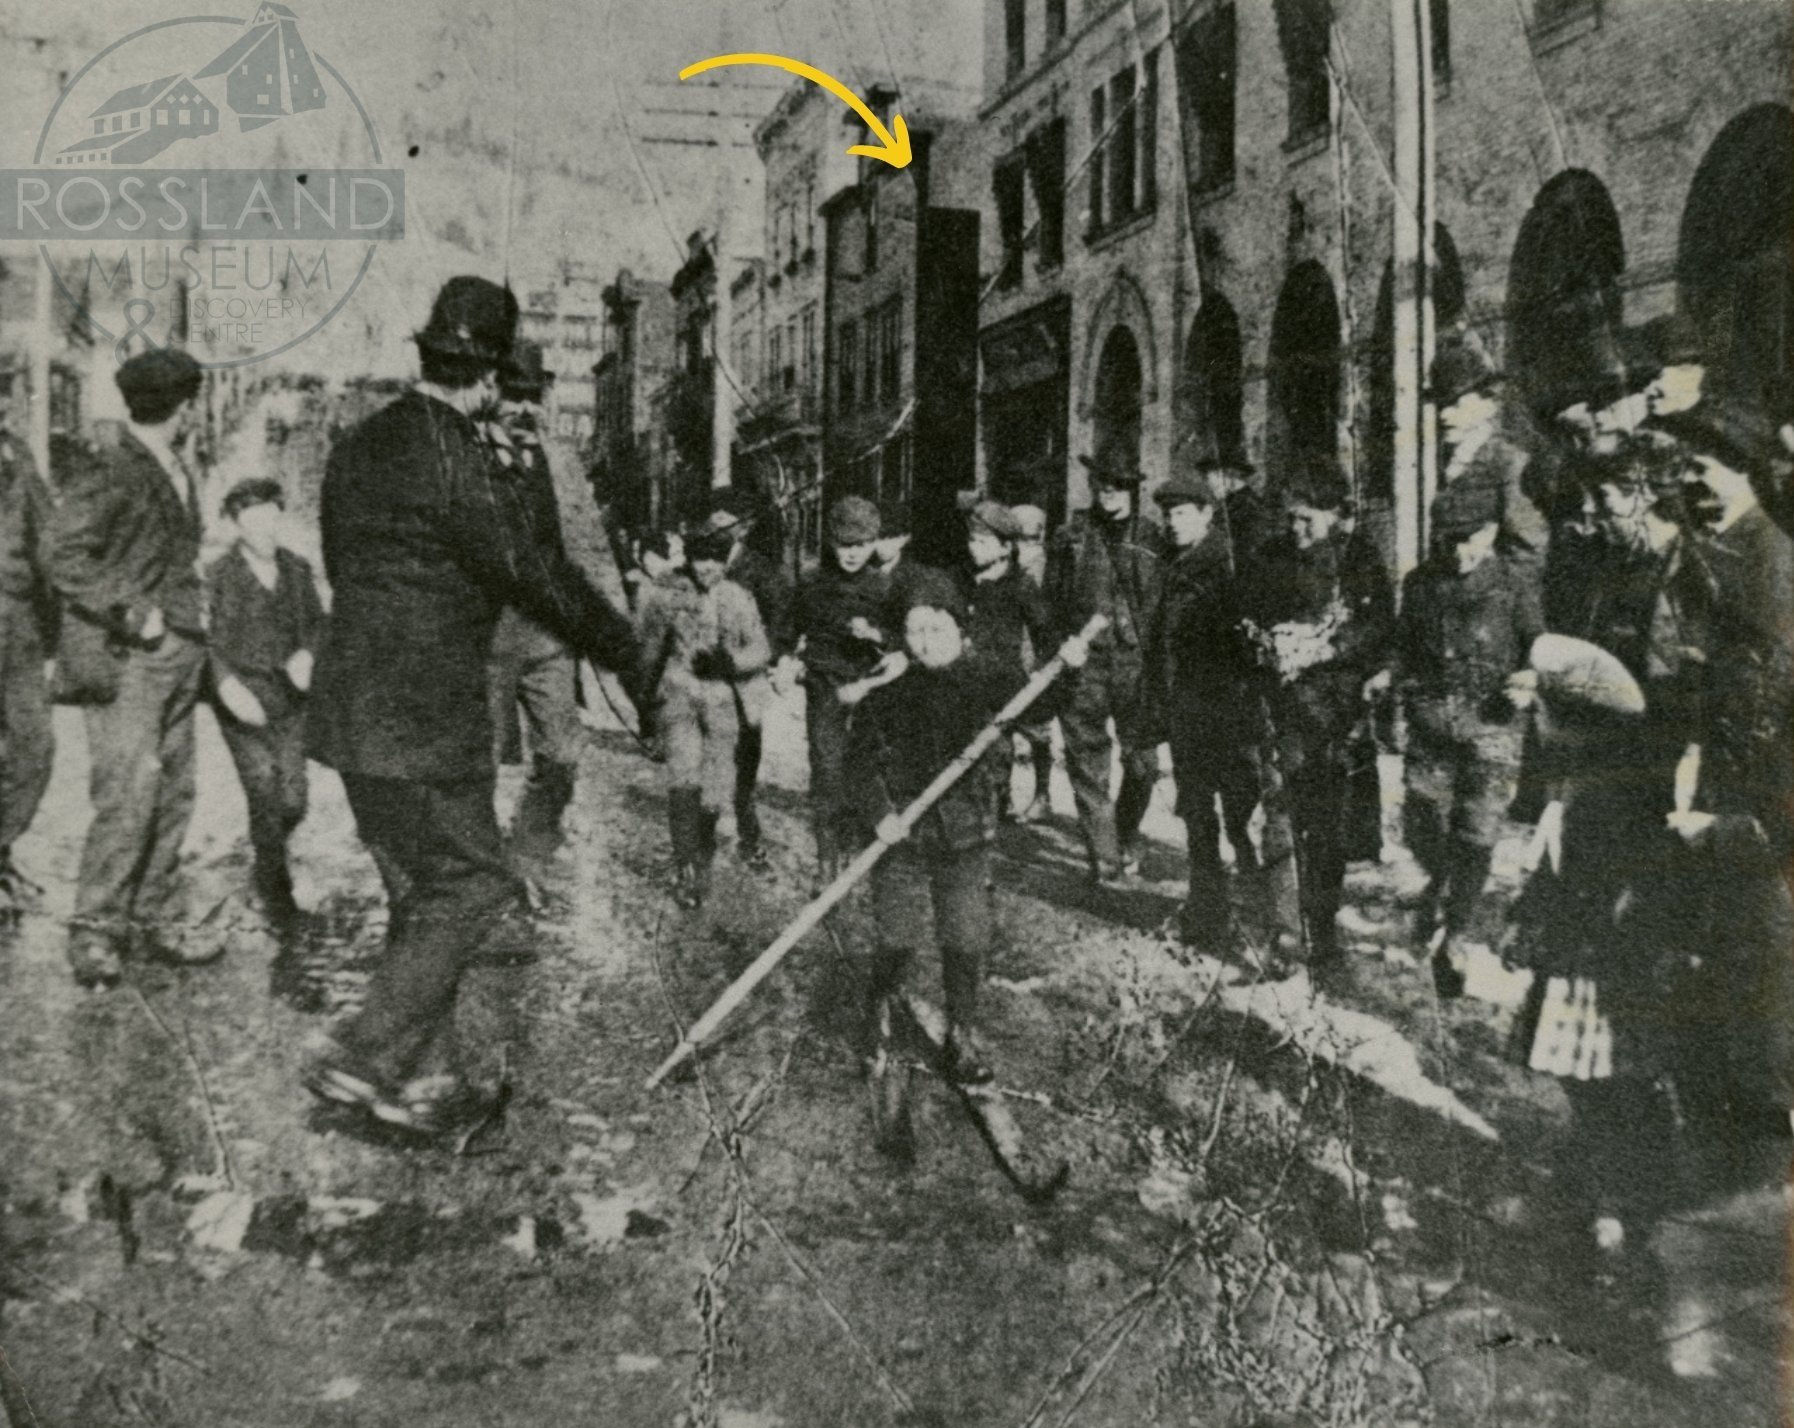  2289.0033: Douglas Lawler winning a ski race on Washington Street, 1902.  The Hotel Collins is in the background. 